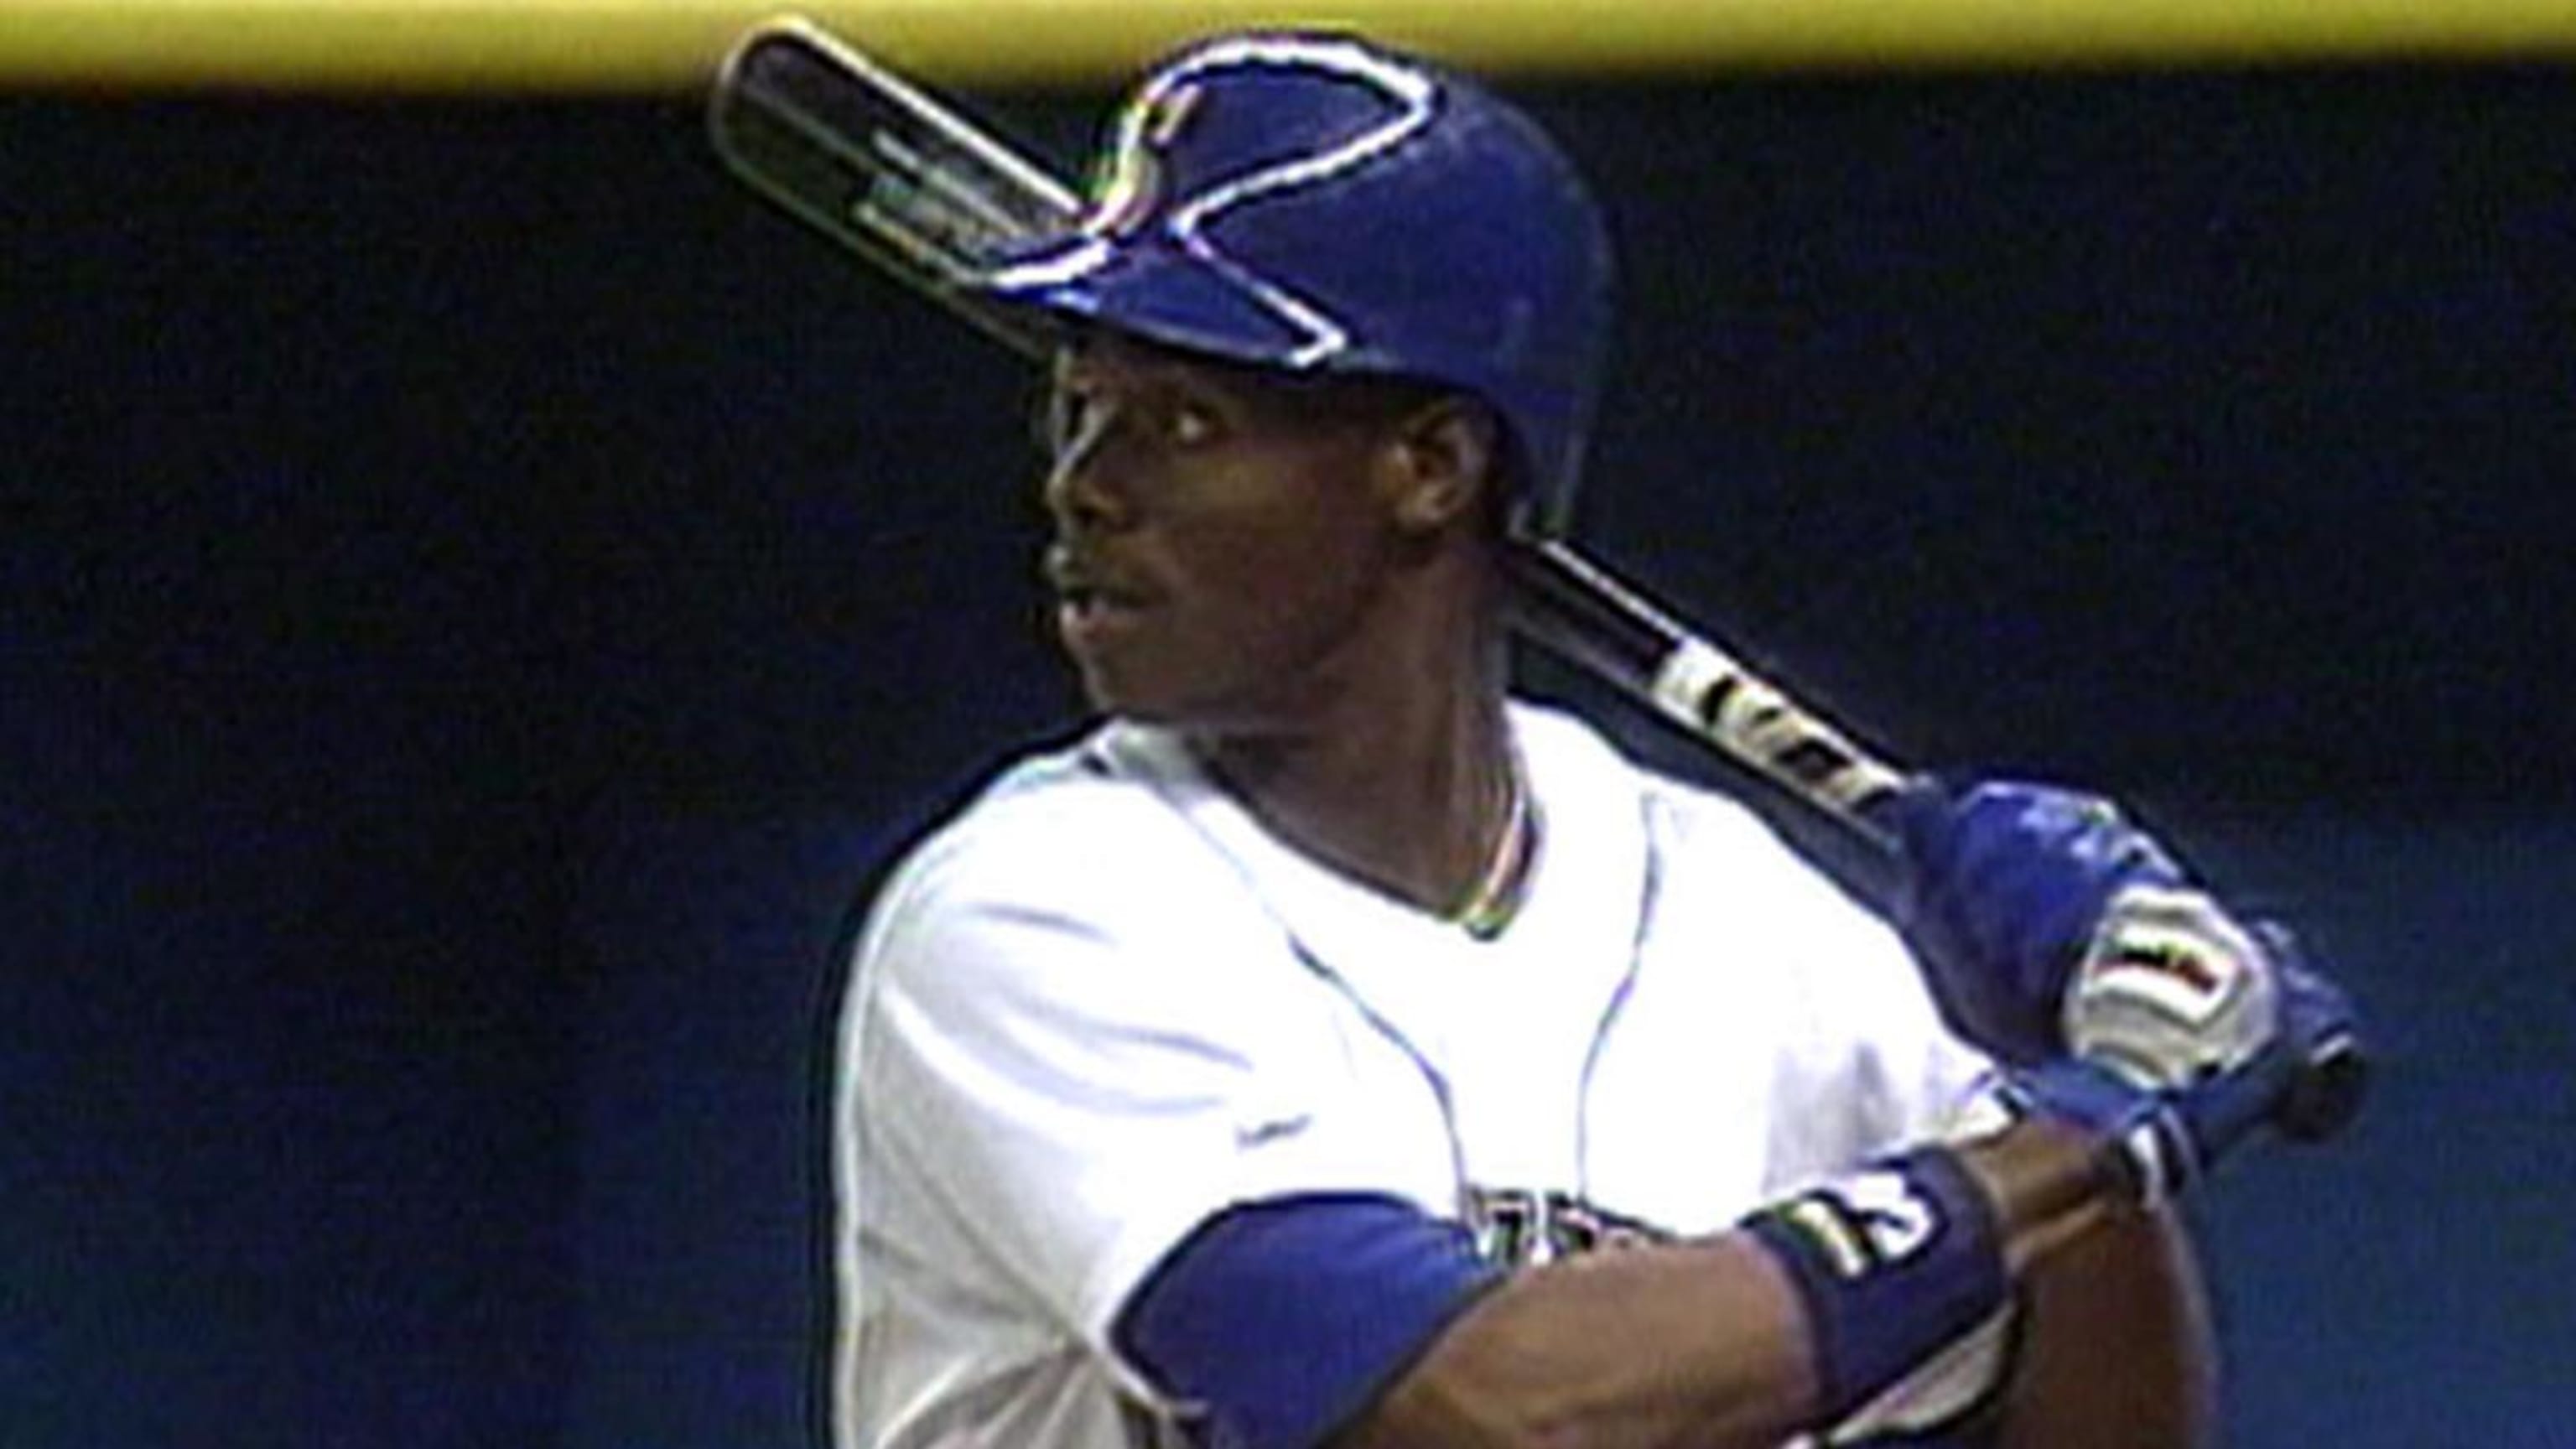 On this day, 28 years ago, Ken Griffey Jr. hit his very first MLB homer